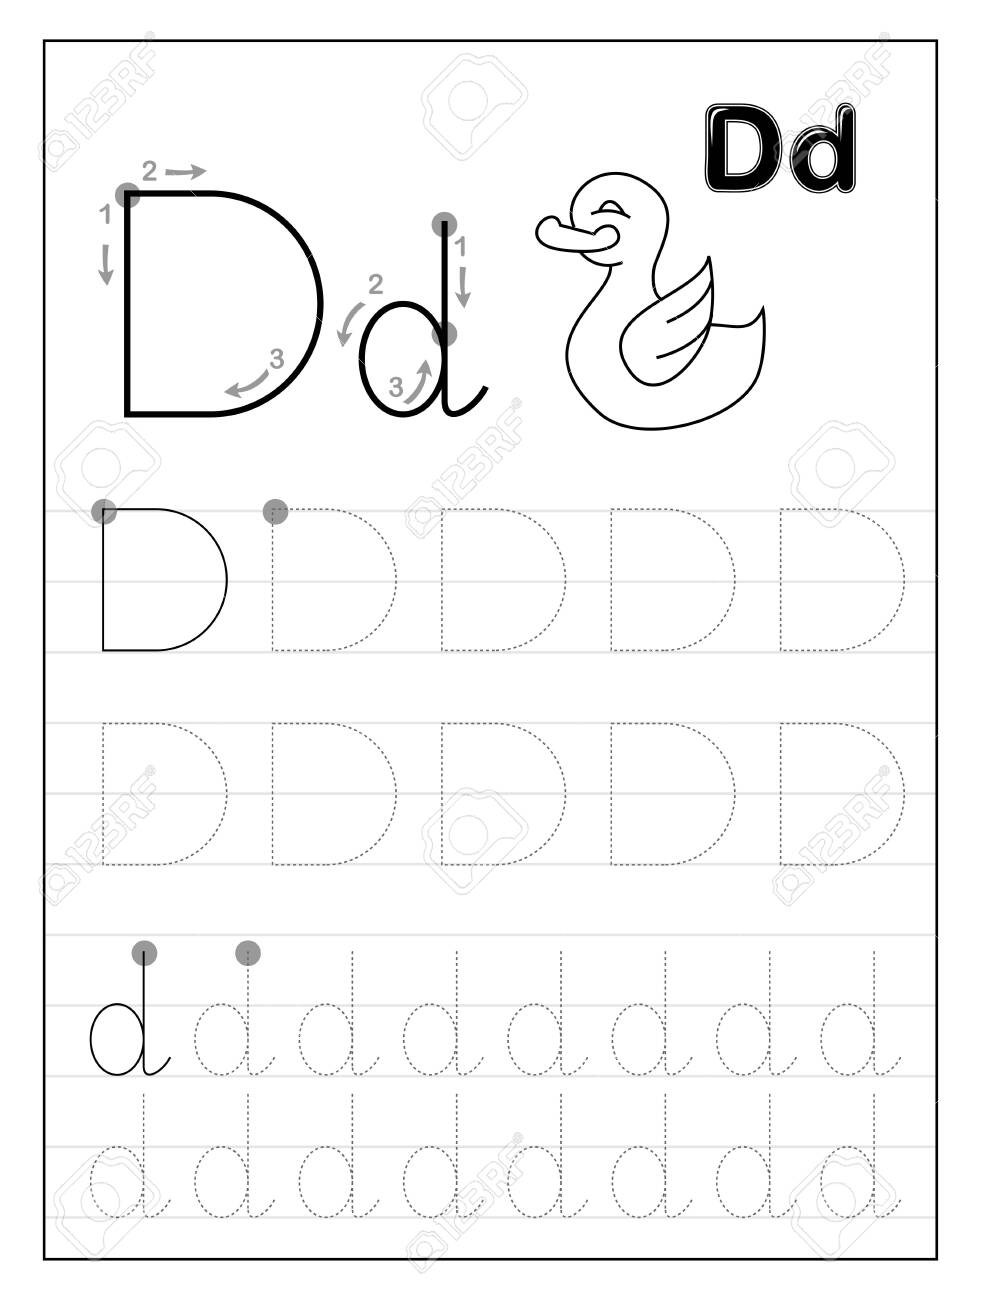 Letter D Worksheet for Preschool Tracing Alphabet Letter D Black and White Educational Pages